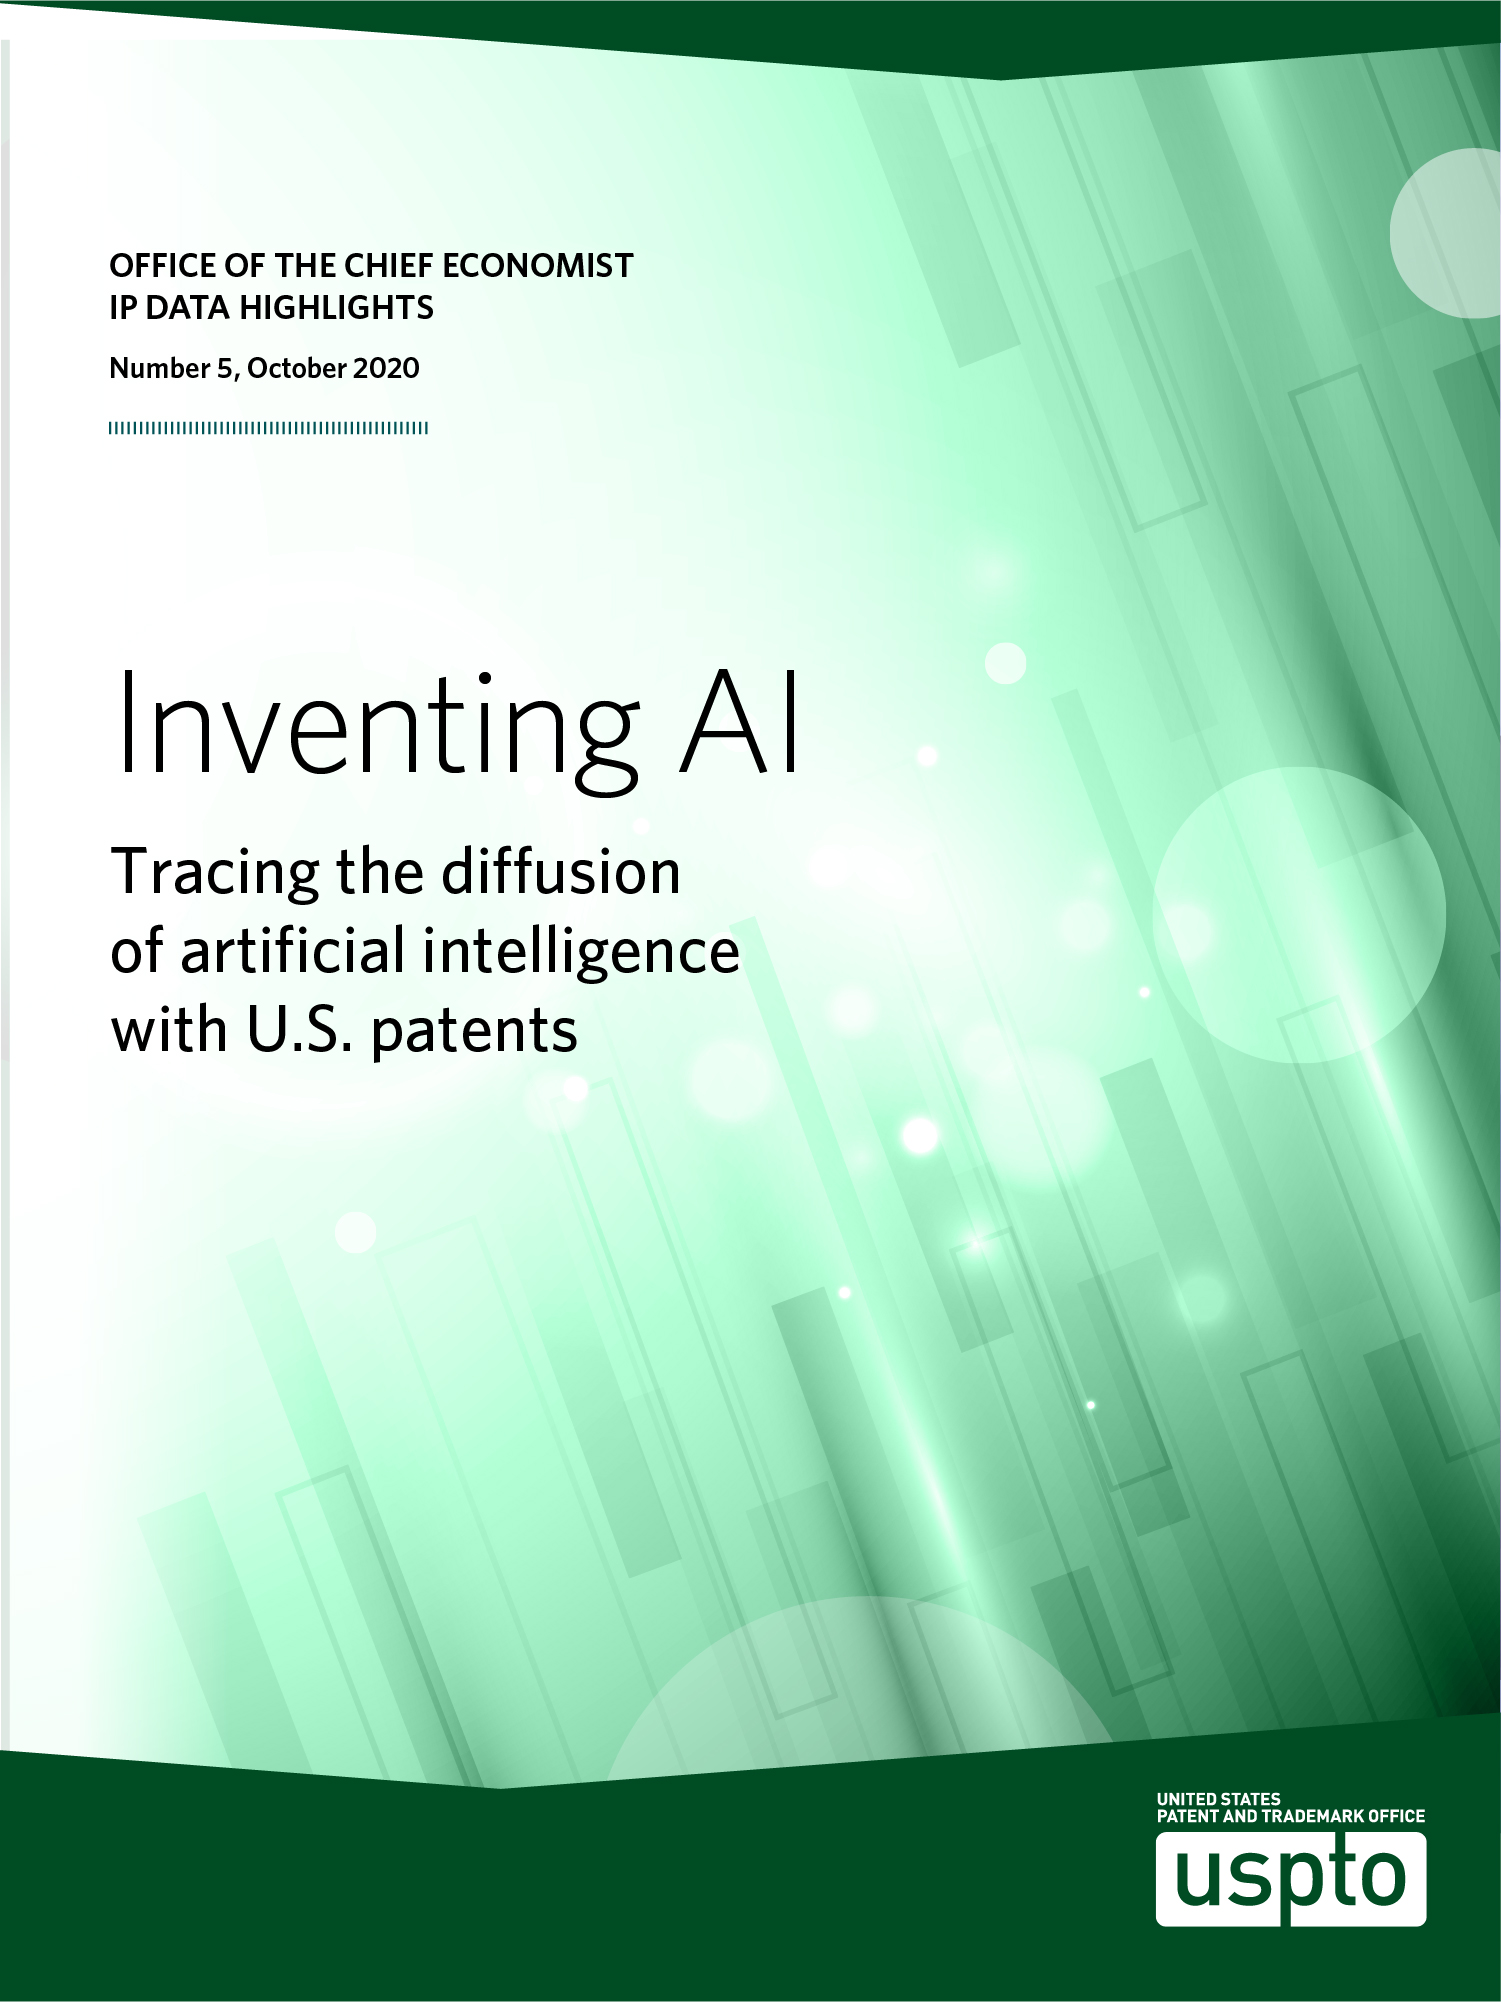 IP Data Highlight no. 5: Inventing AI, text on a green background